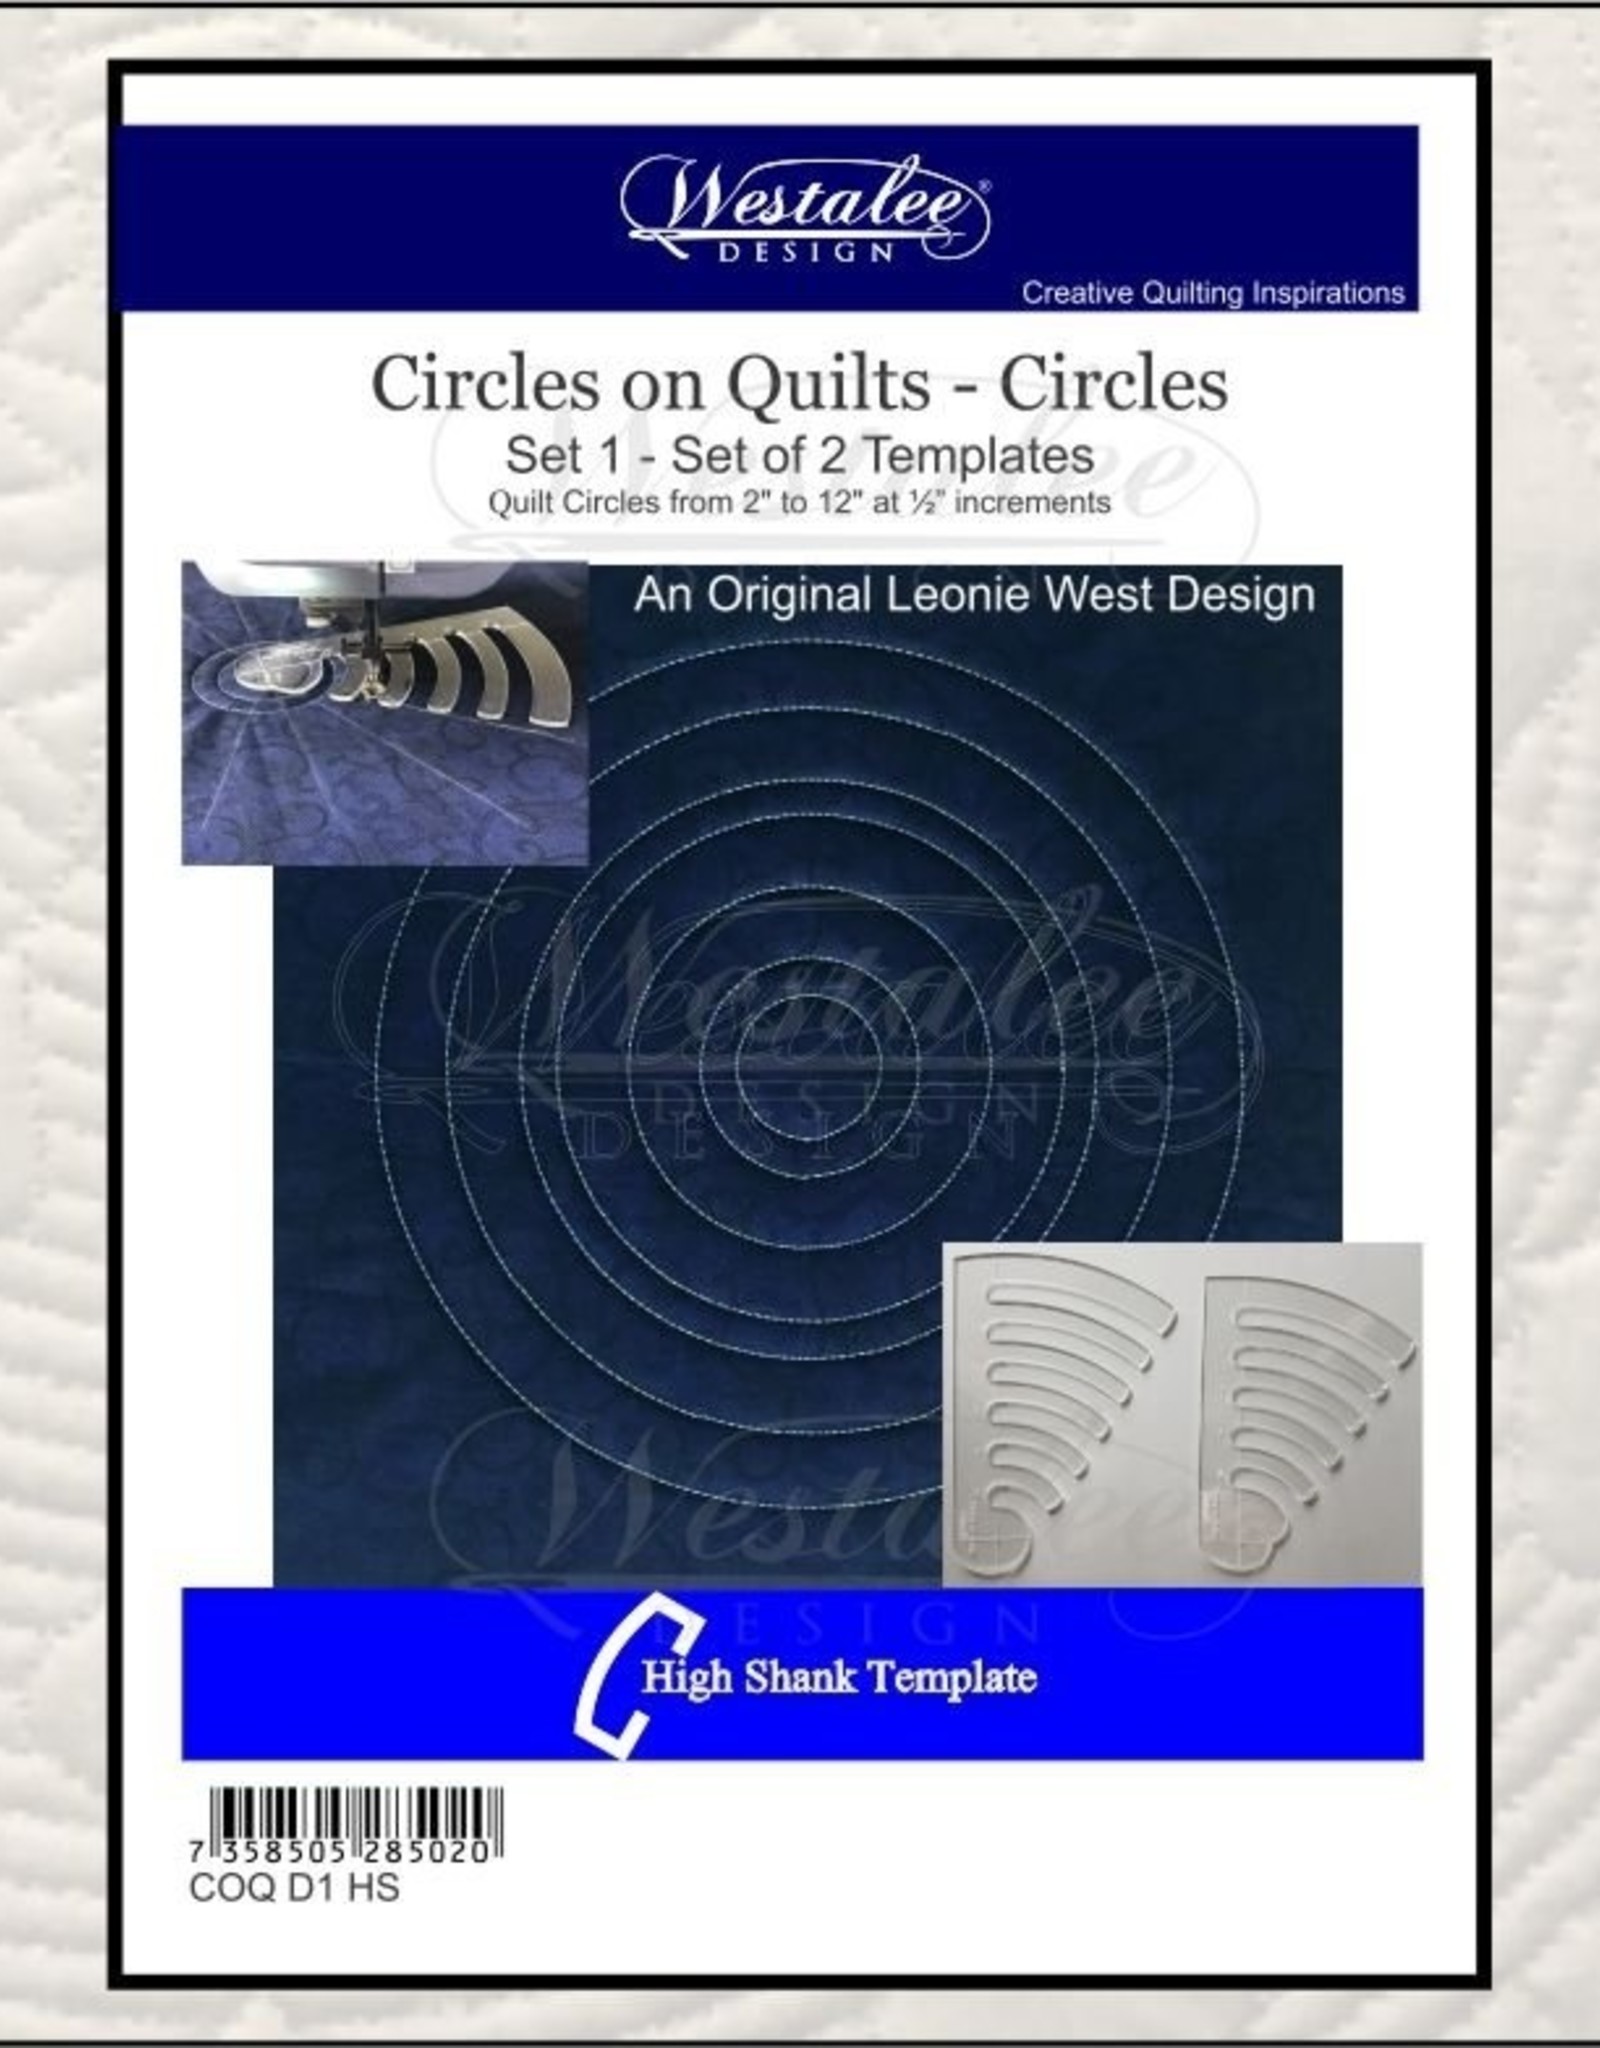 Westalee Circles on Quilts Low Shank Set of 2